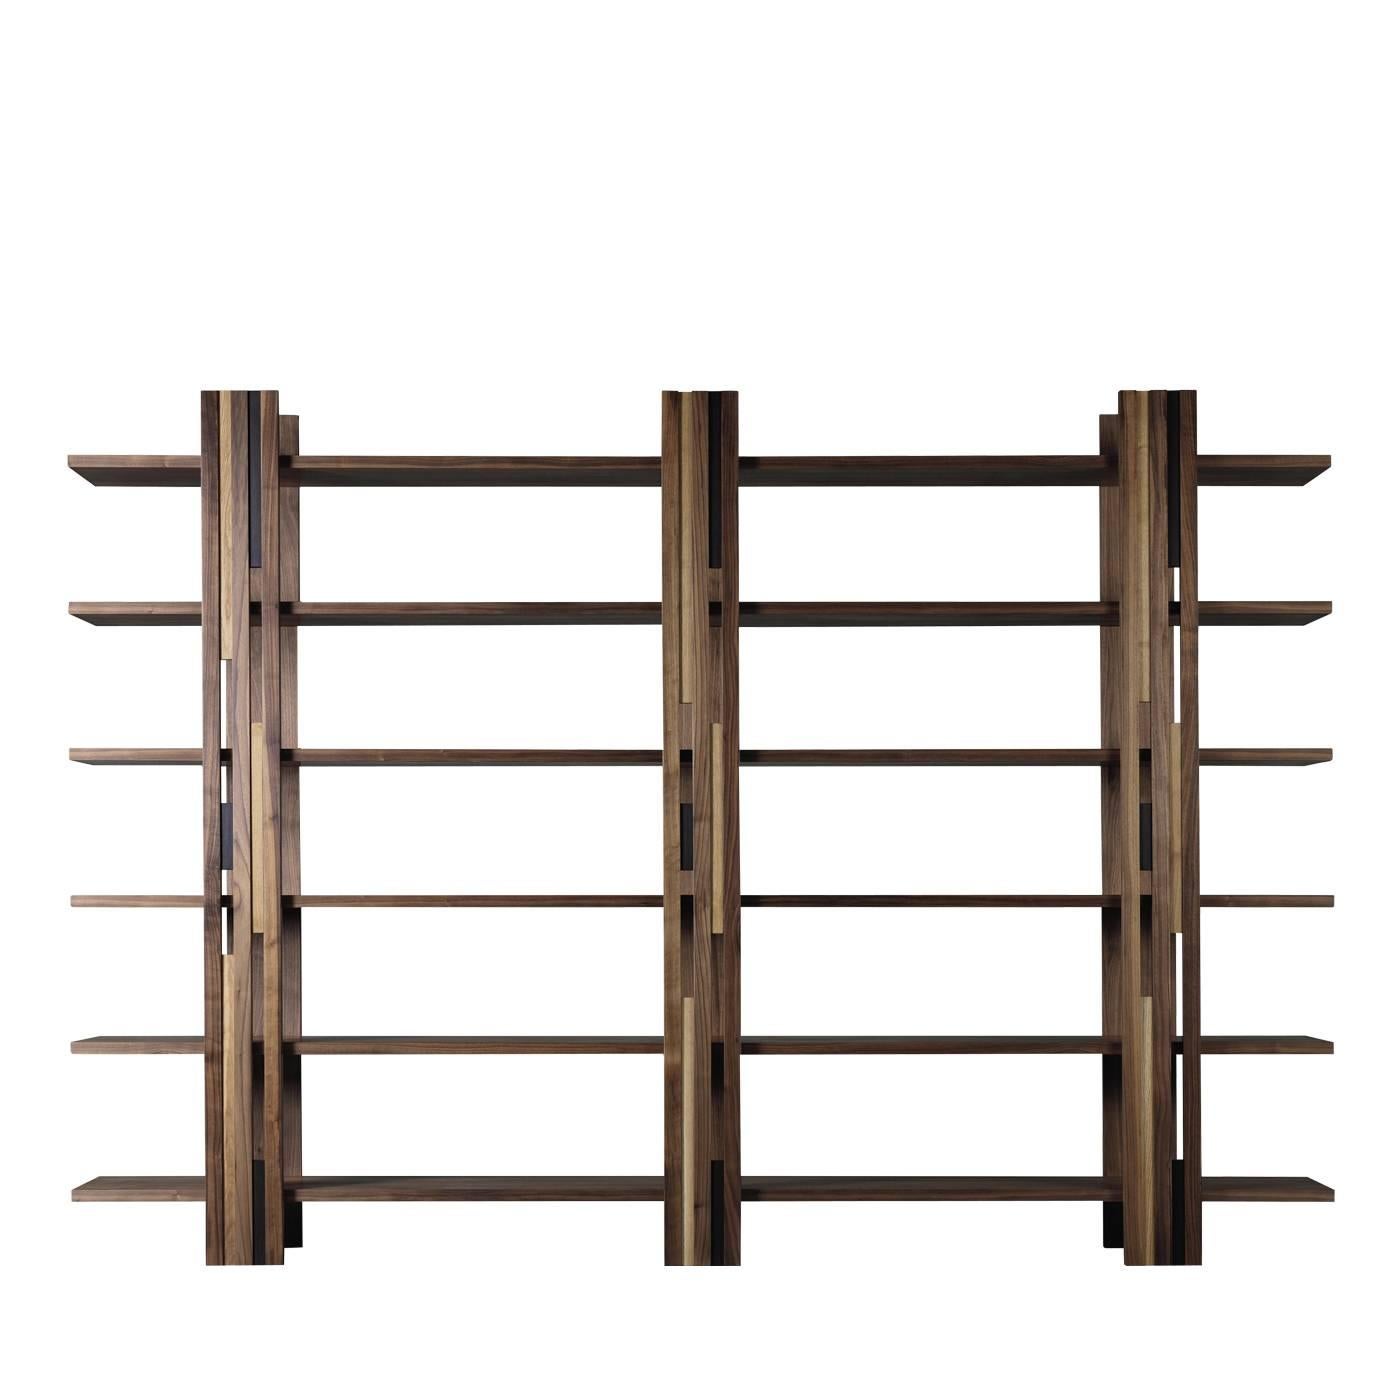 This modern and sophisticated bookshelf features a simple structure that is enriched by the combination of two different types of wood: durmast oak and wenge. The different hues and textures of the two woods add dynamism to the front of the three